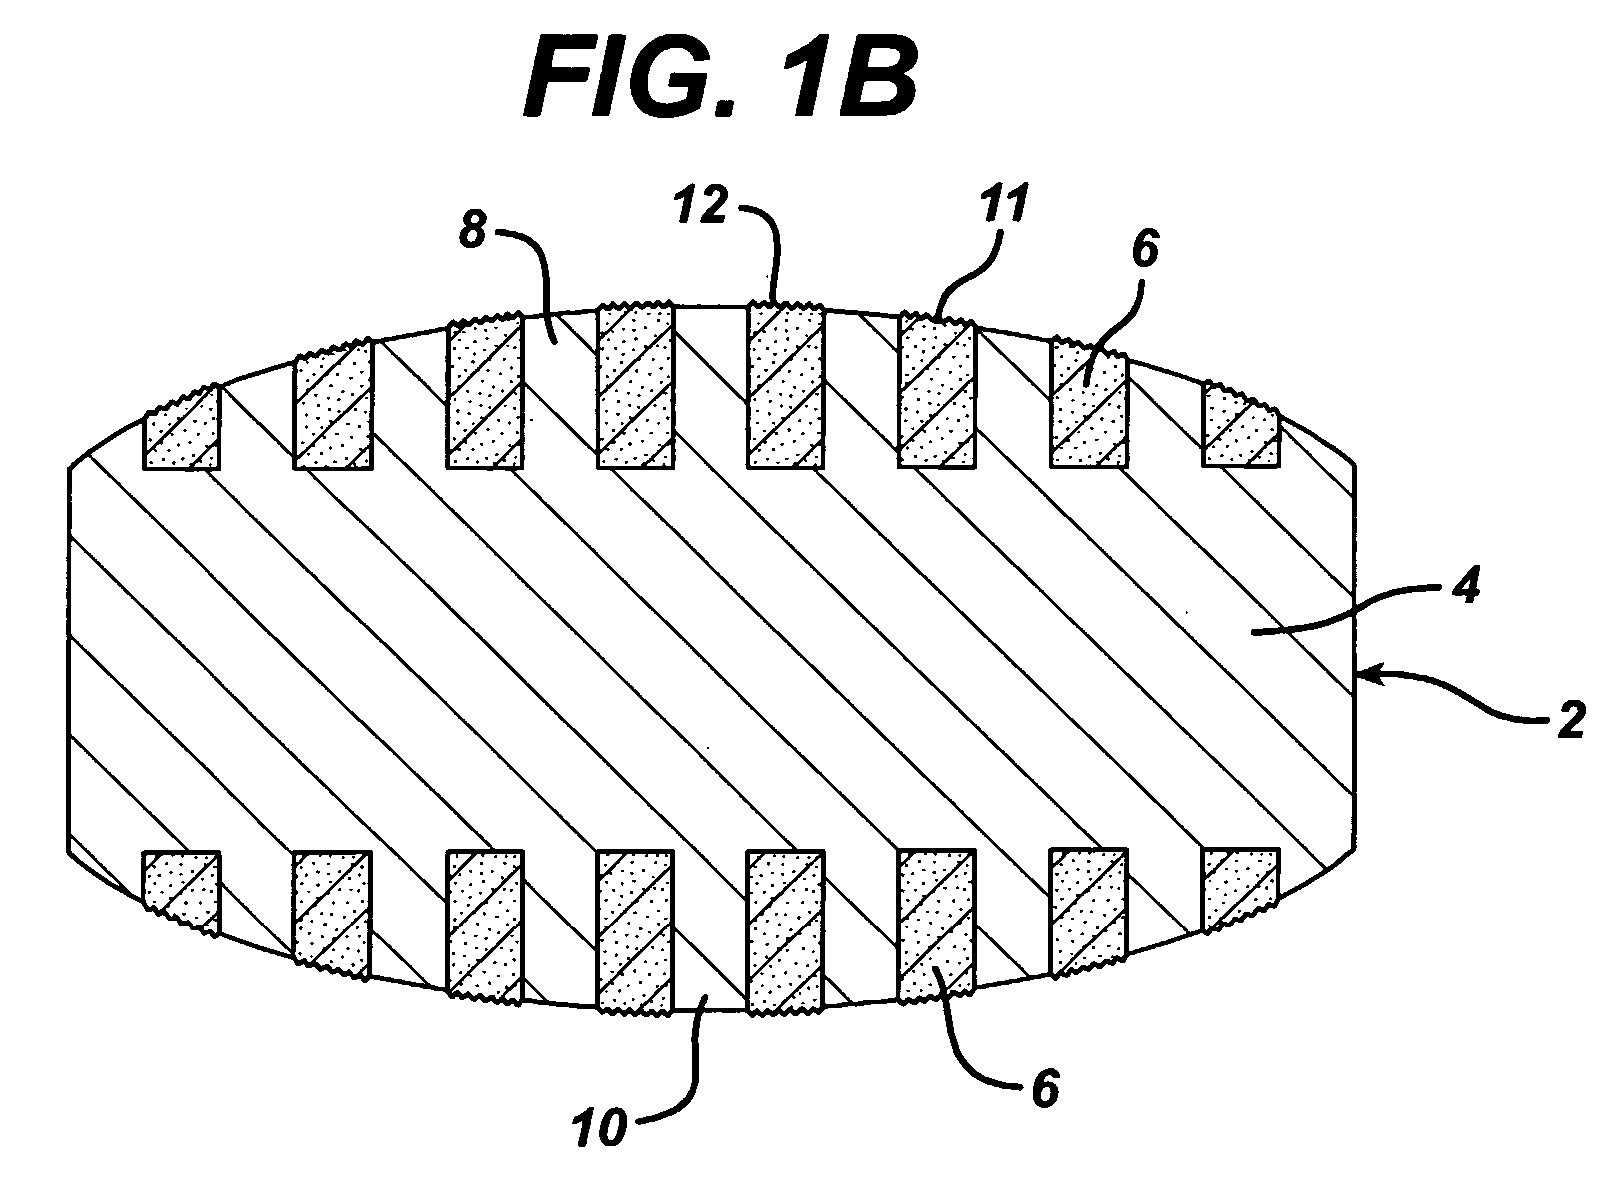 Dosage forms having a microreliefed surface and methods and apparatus for their production